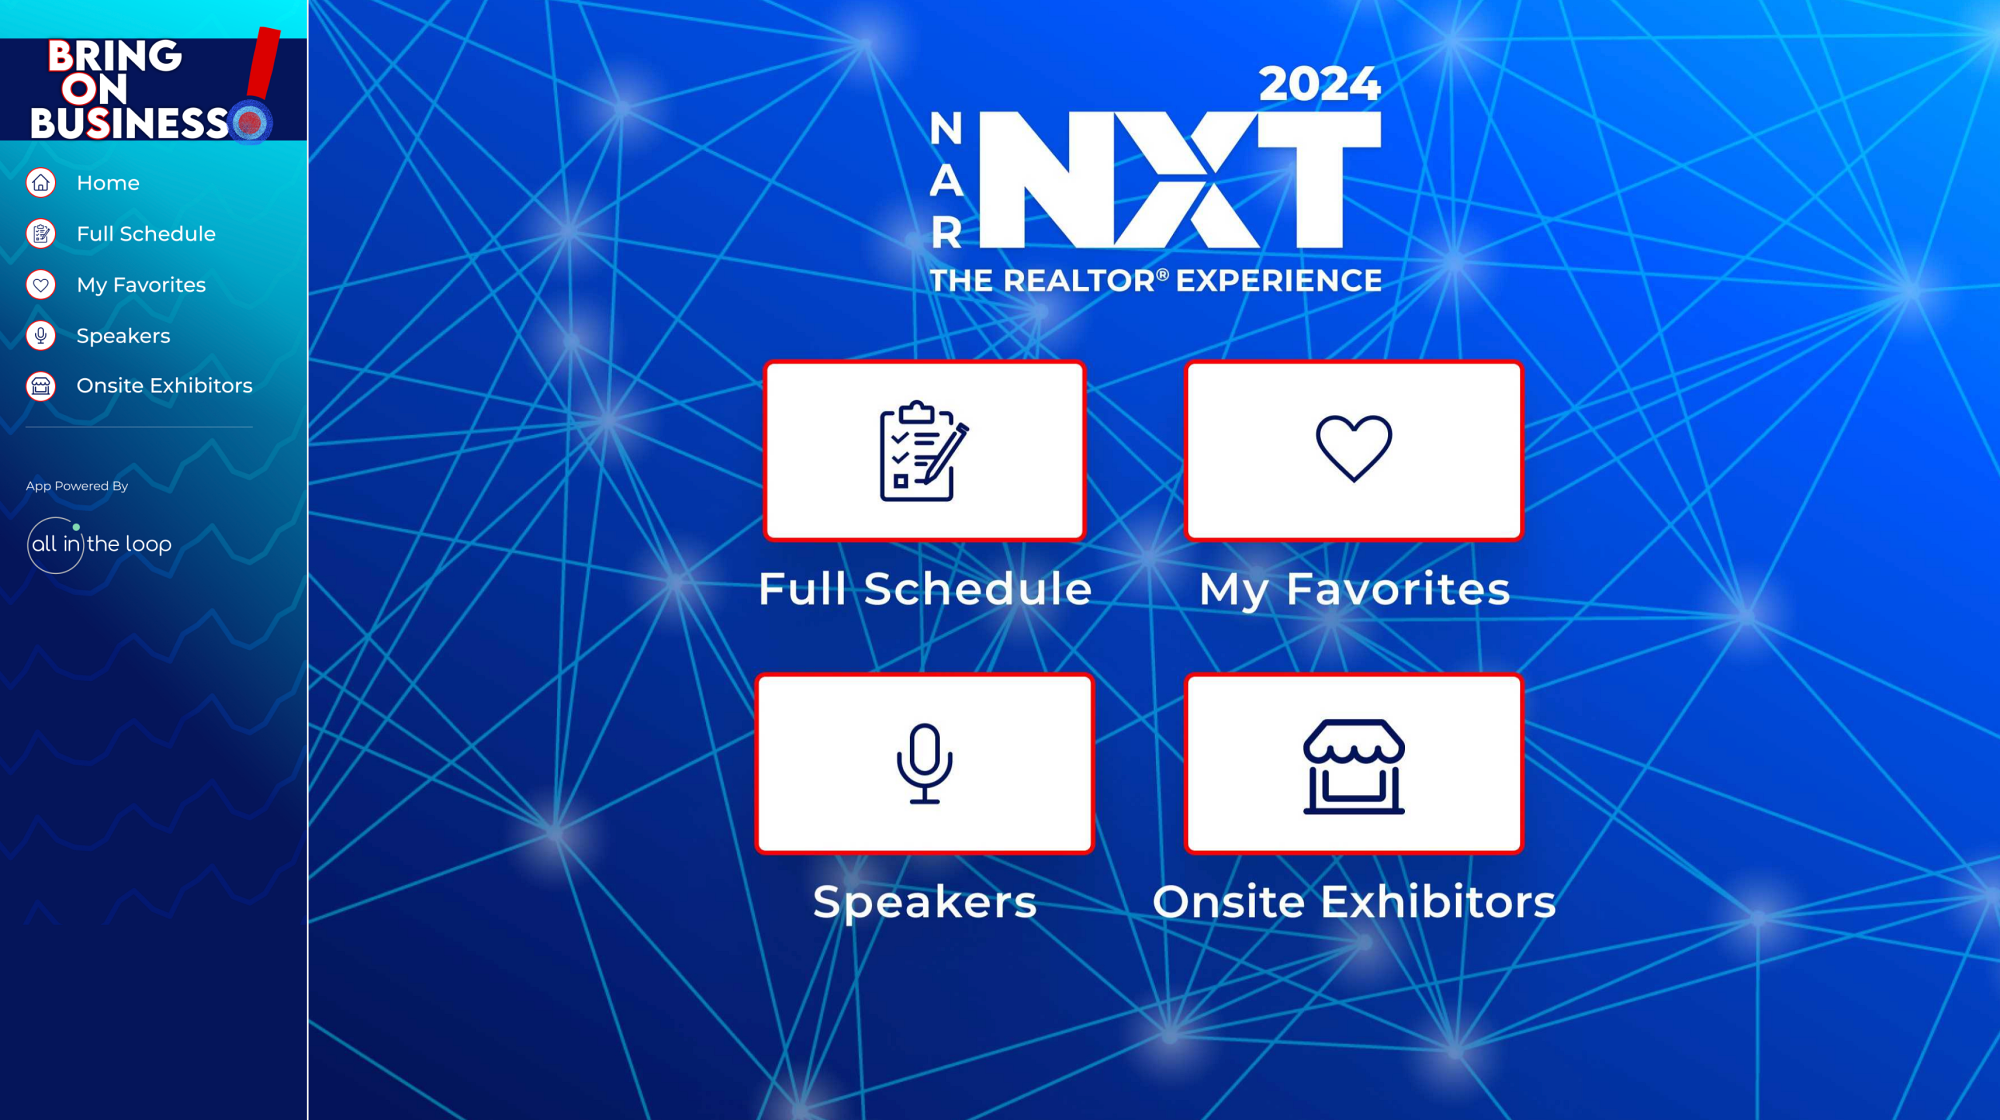 NAR NXT 2024 Event Planner home screen from All in the Loop